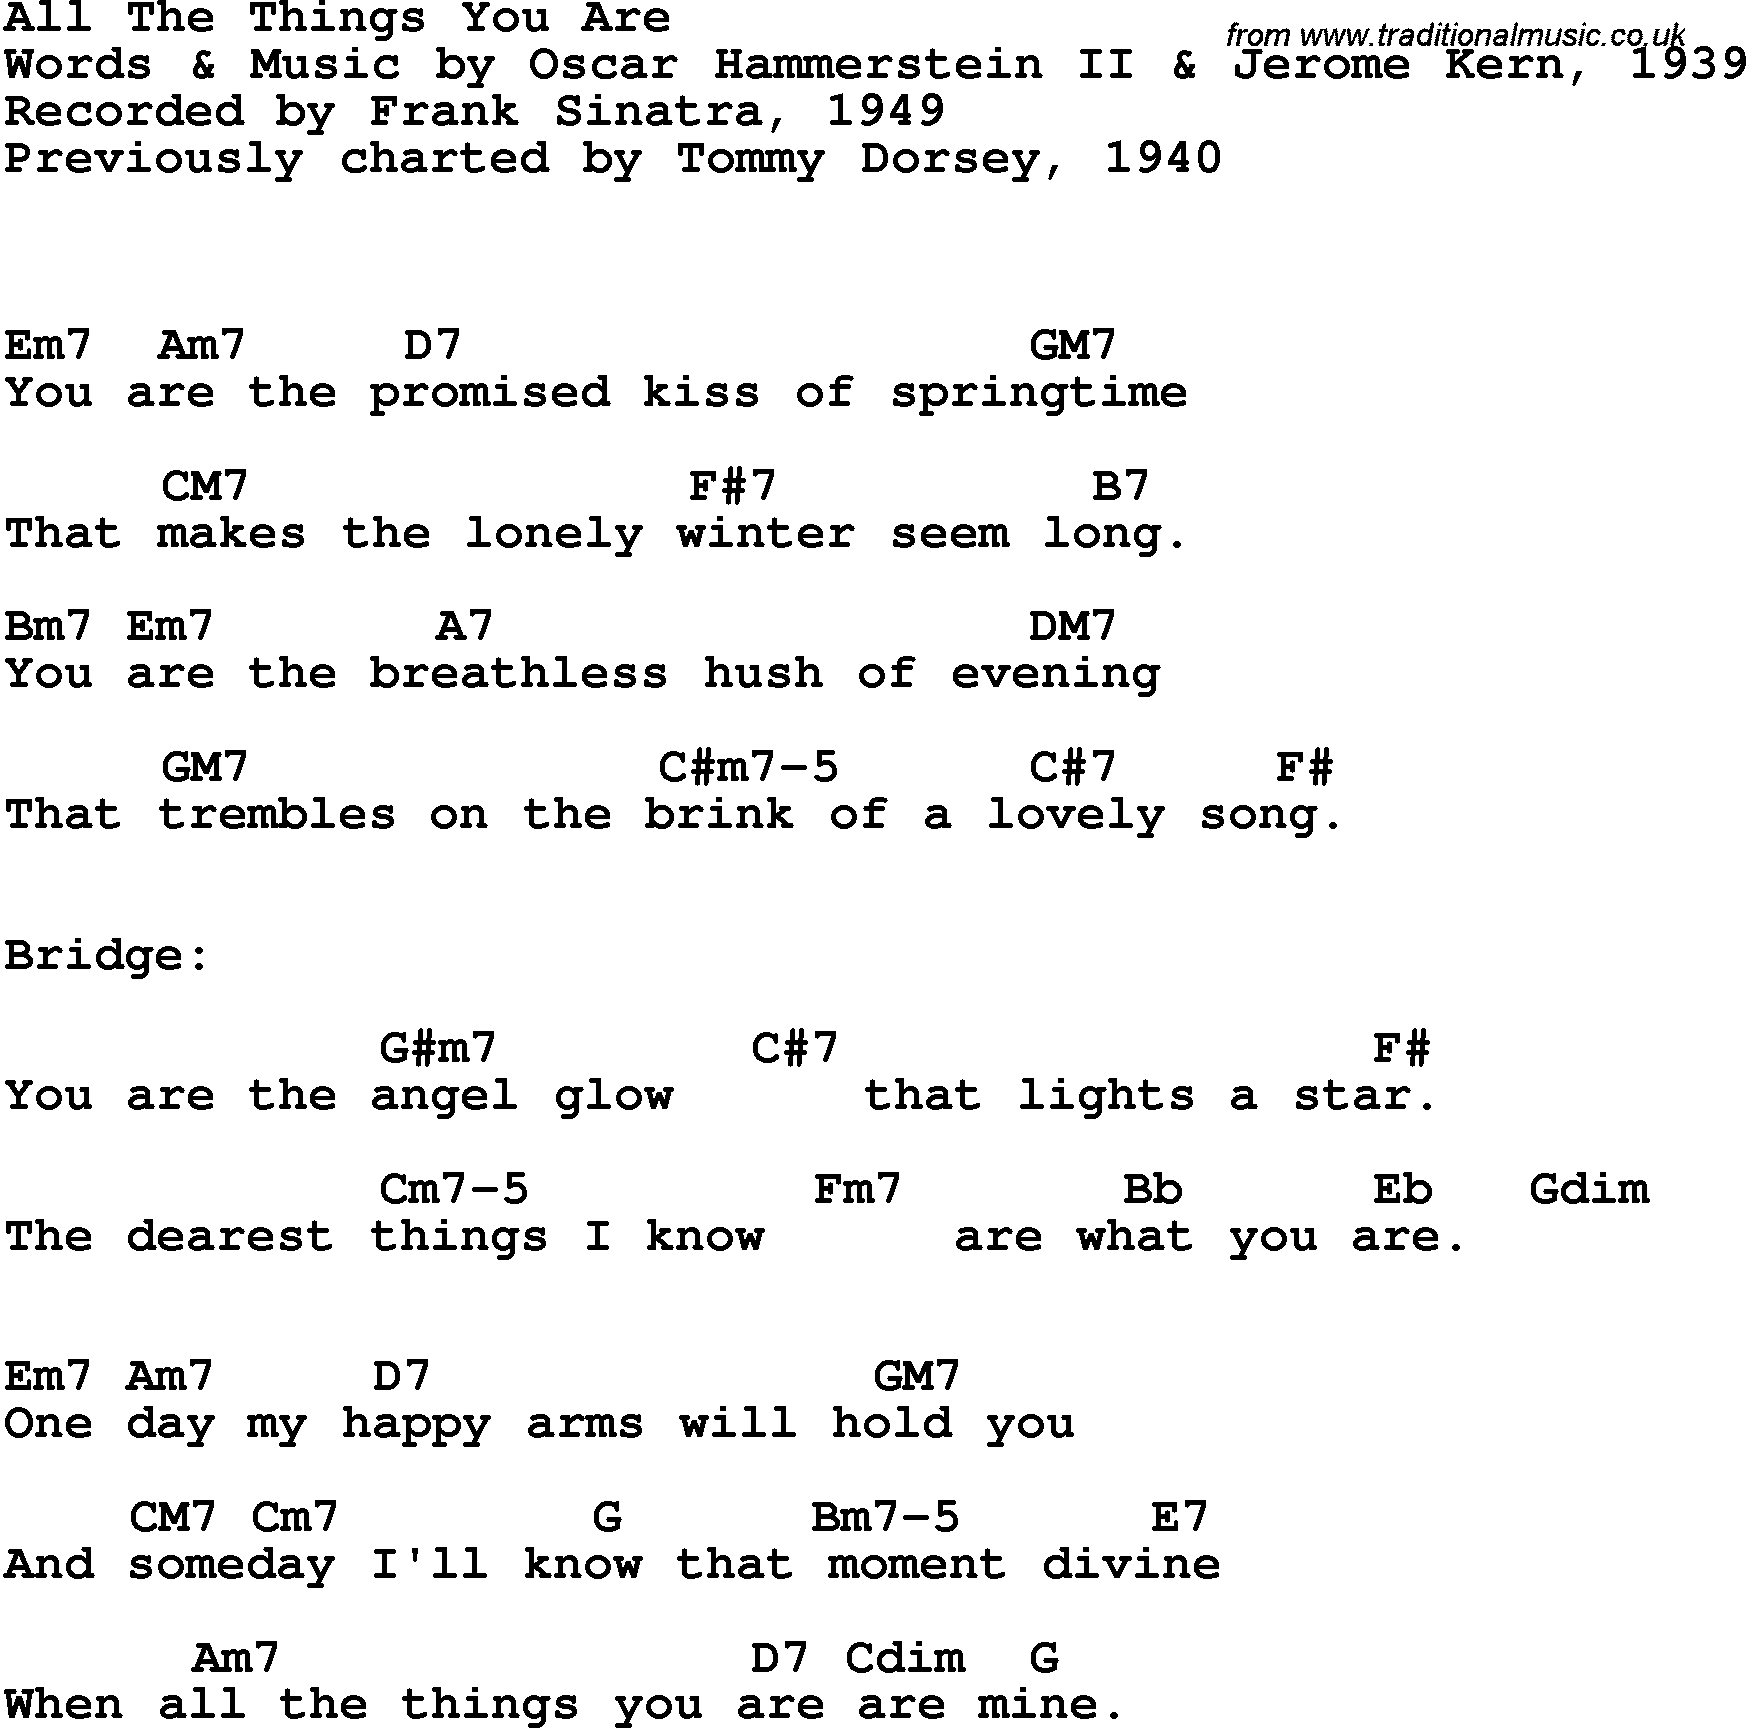 Song Lyrics with guitar chords for All The Things You Are - Frank Sinatra, 1949